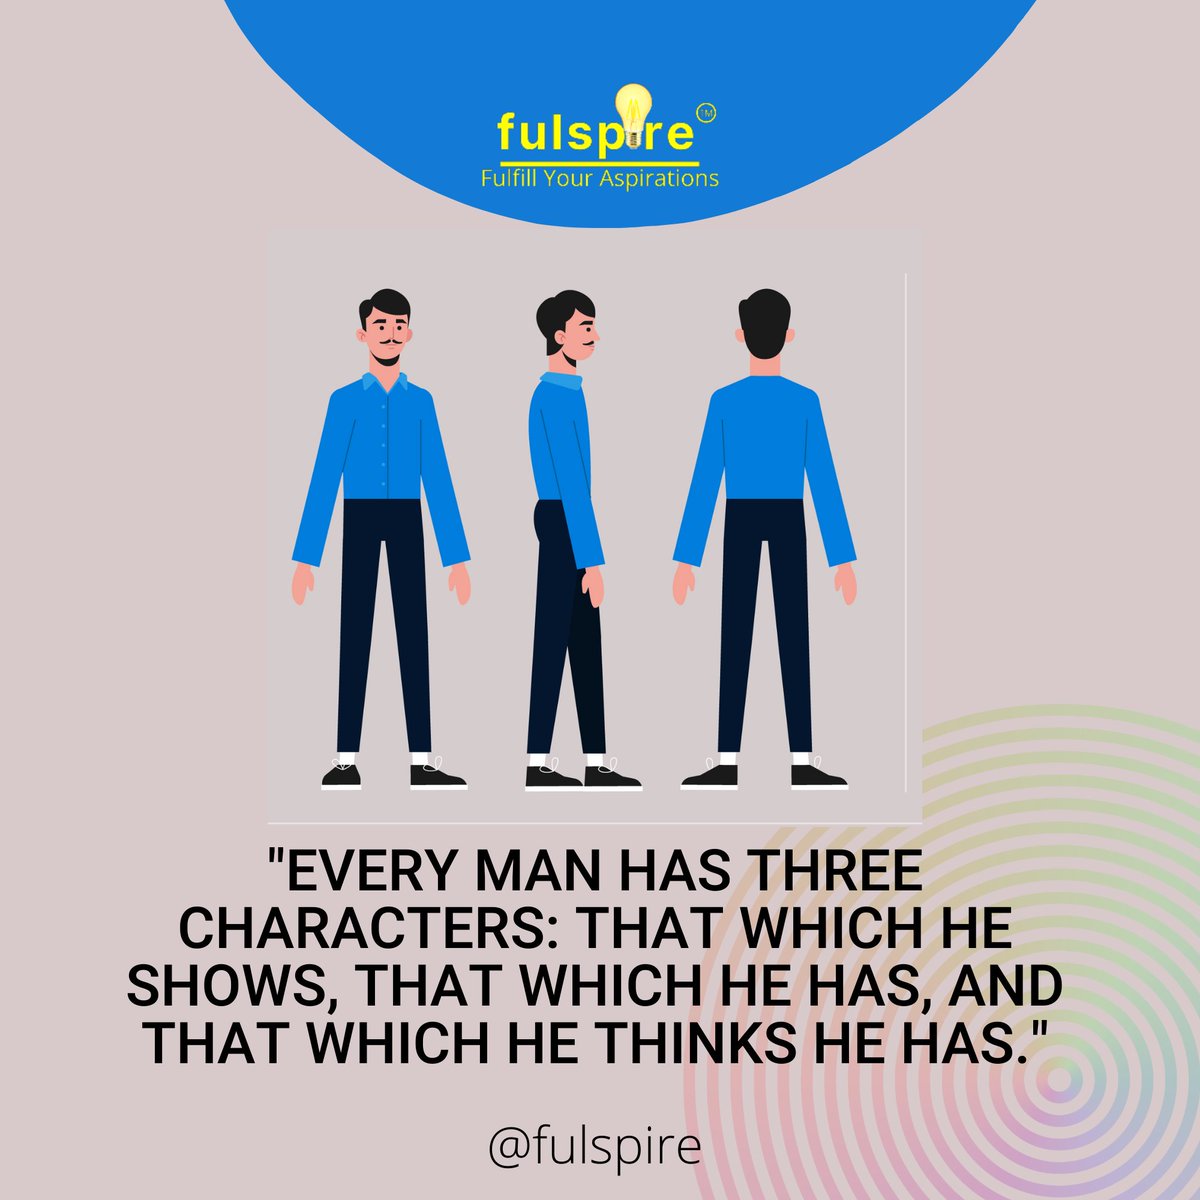 'Every man has three characters: that which he shows, that which he has, and that which he thinks he has.'
- Alphonse Karr.
#characterwhichweshow #whatweare #pharmagrowth